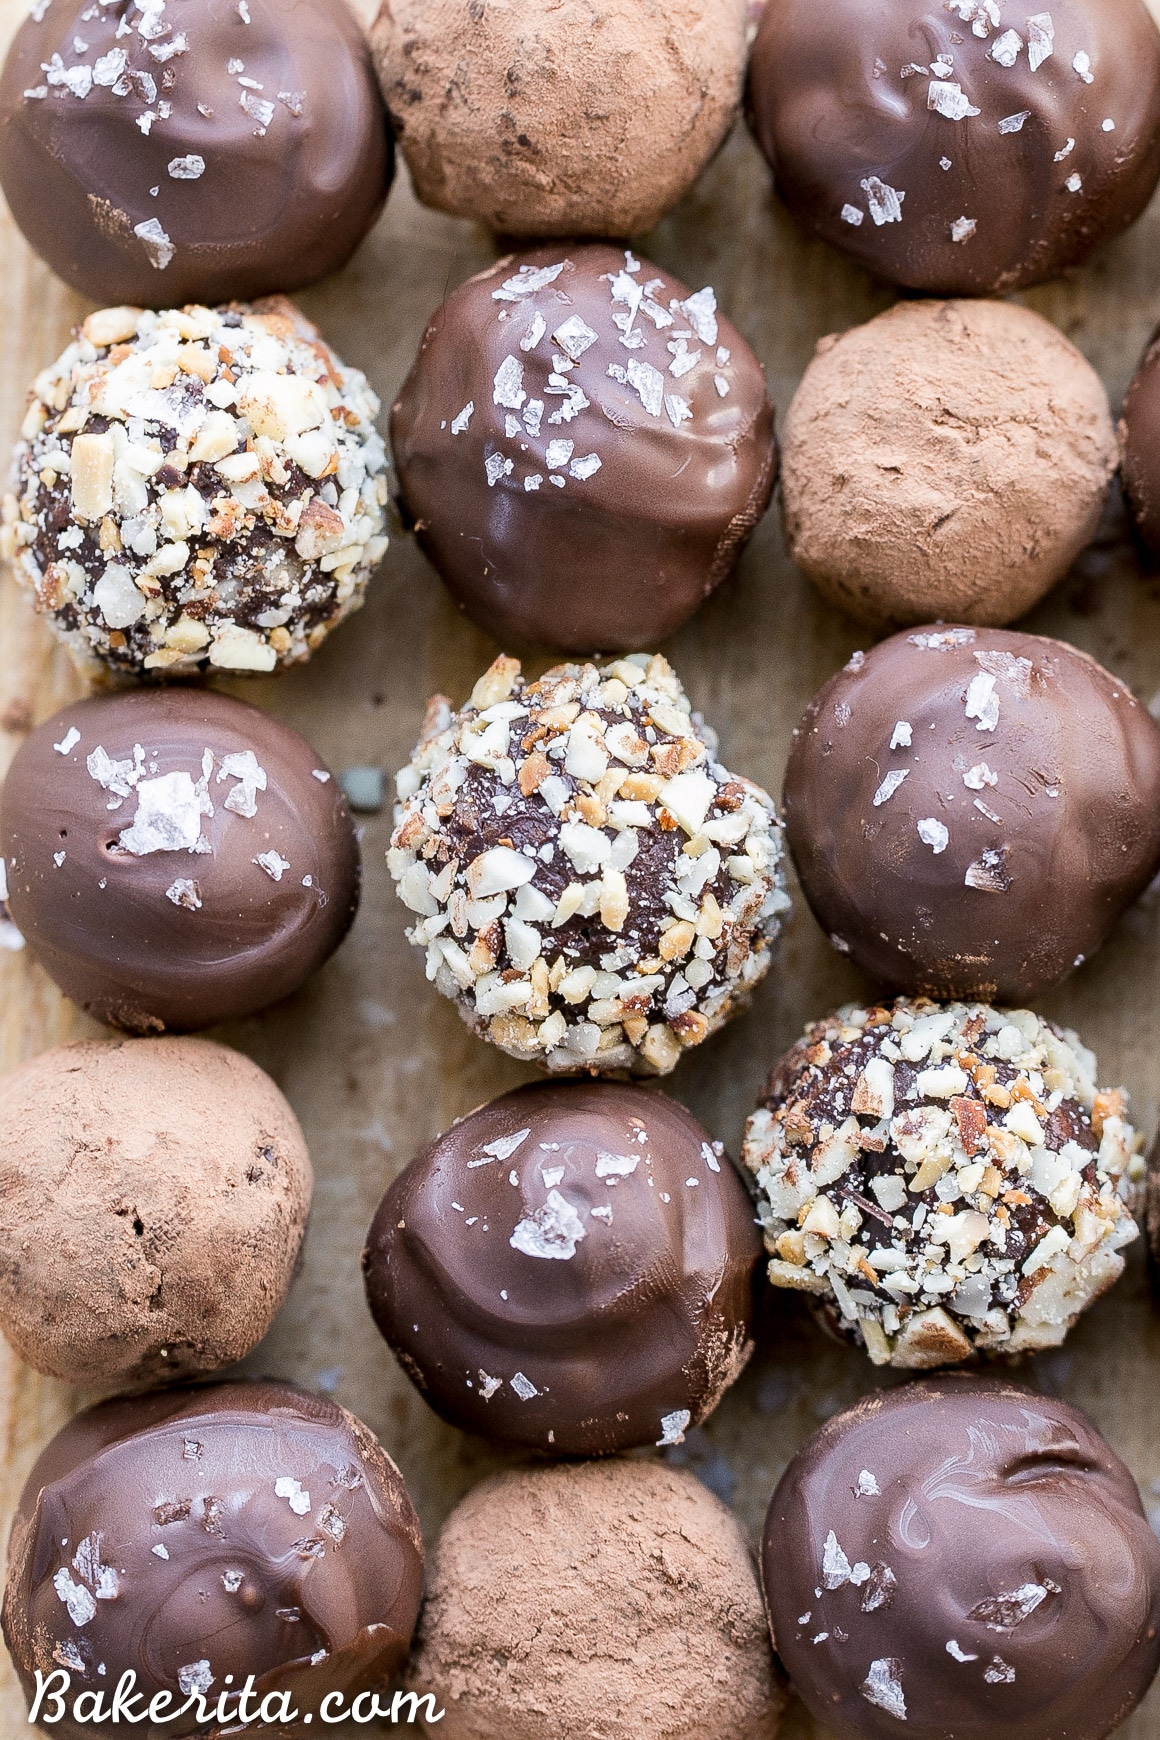 With toasted almonds for crunch and a sprinkle of sea salt on top, these Salted Almond Chocolate Truffles are a chocolate lover's dream! They're easy to make, Paleo-friendly, and vegan. A batch of these truffles makes the perfect holiday gift.